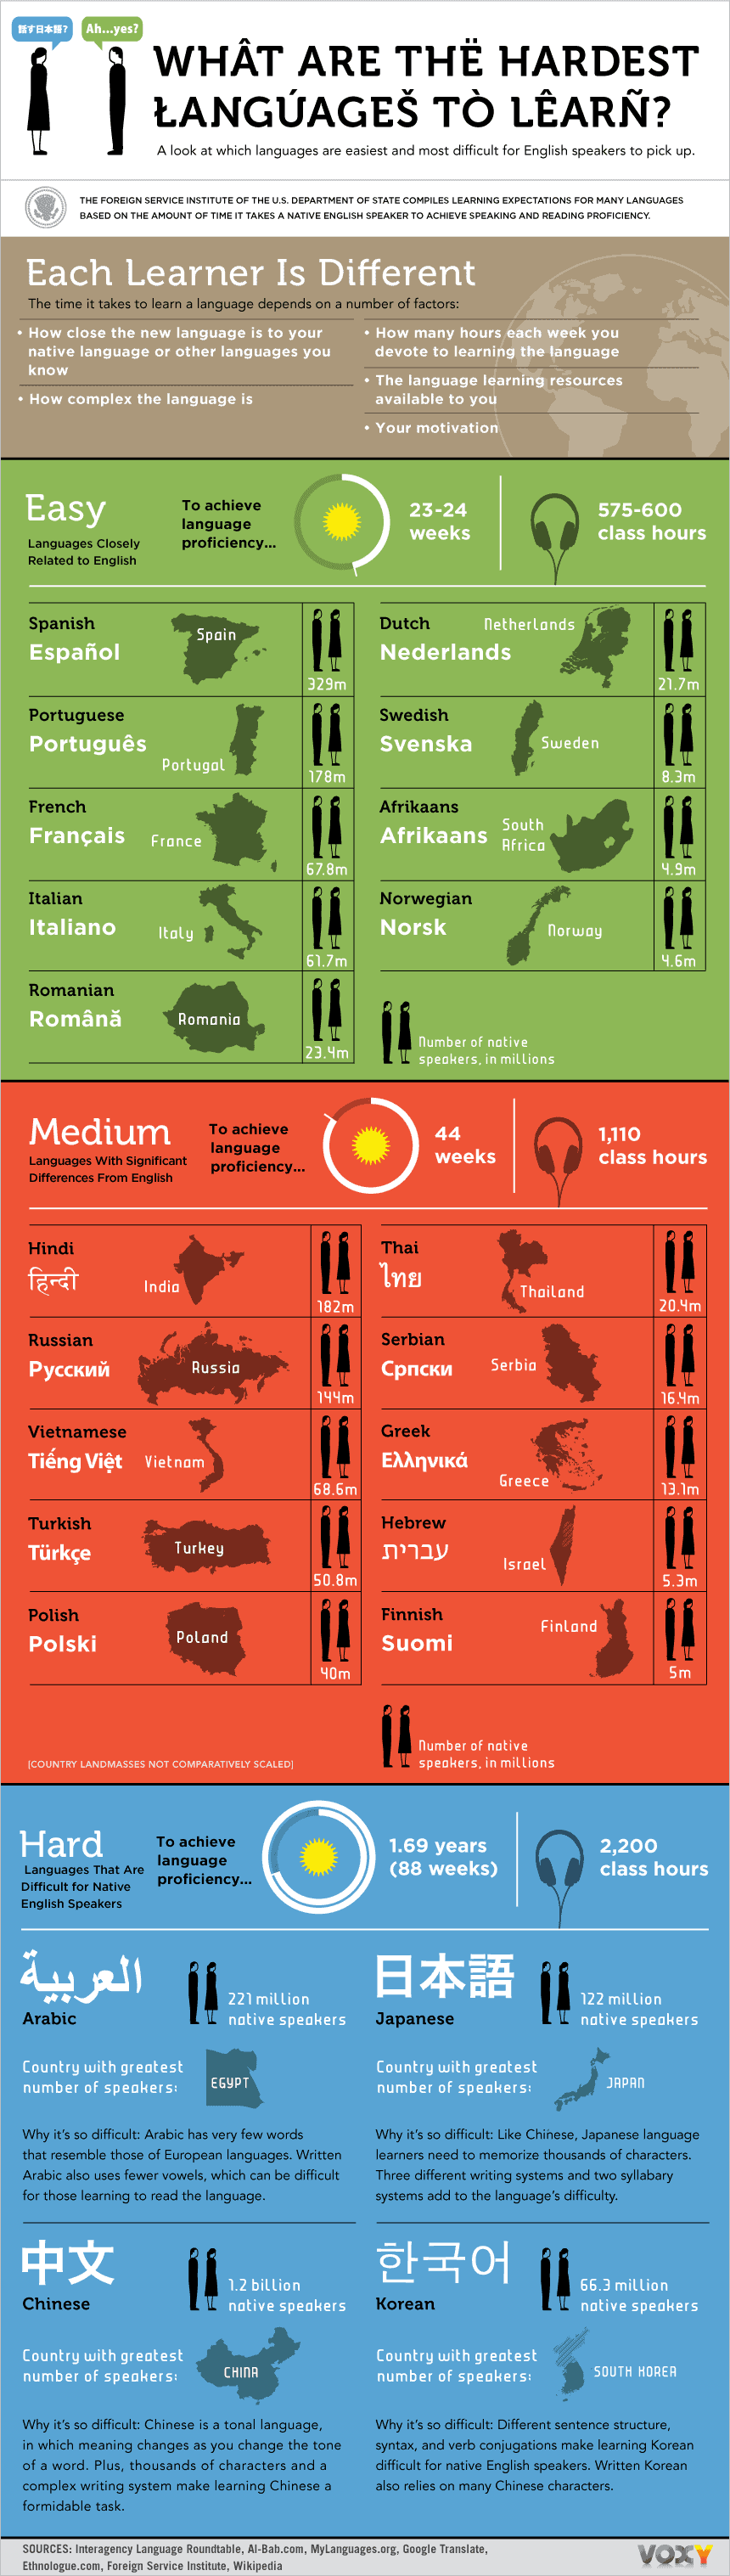 Infographic ranking languages by difficulty